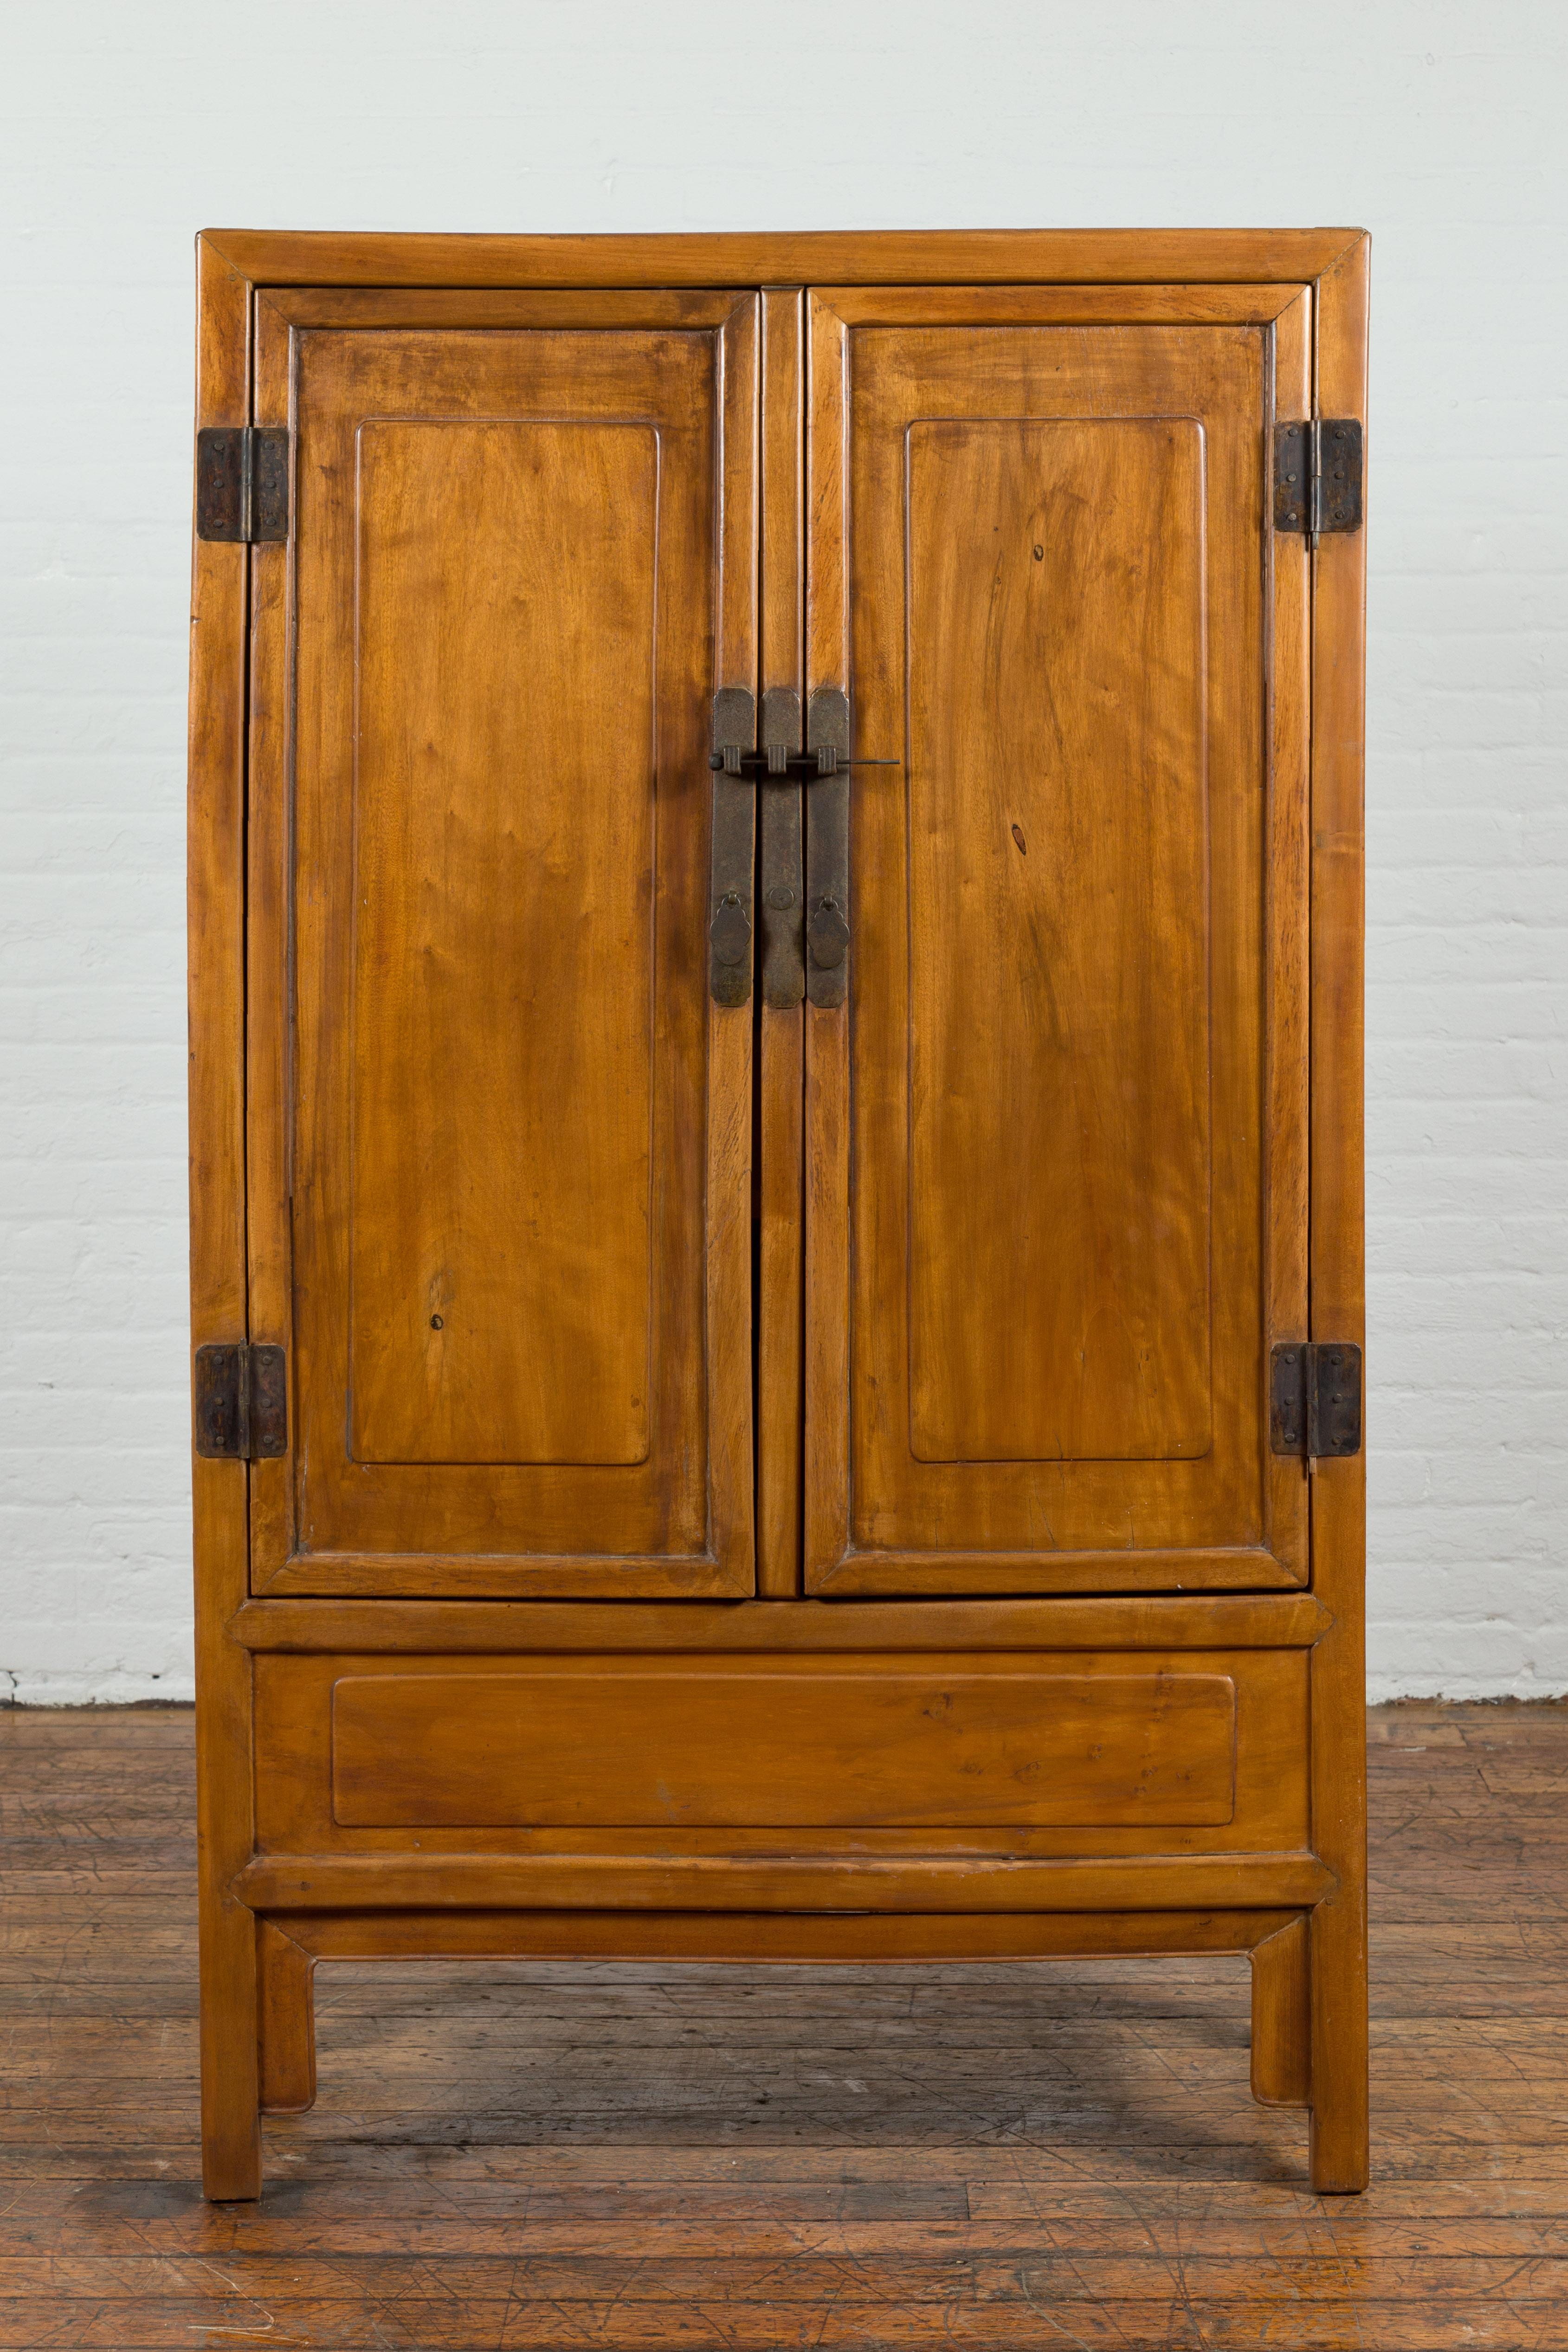 A Chinese vintage natural elmwood cabinet from the mid 20th century, with brass hardware and hidden drawers. Created in China during the midcentury period, this cabinet features a linear silhouette perfectly complimented by a natural elm patina. The